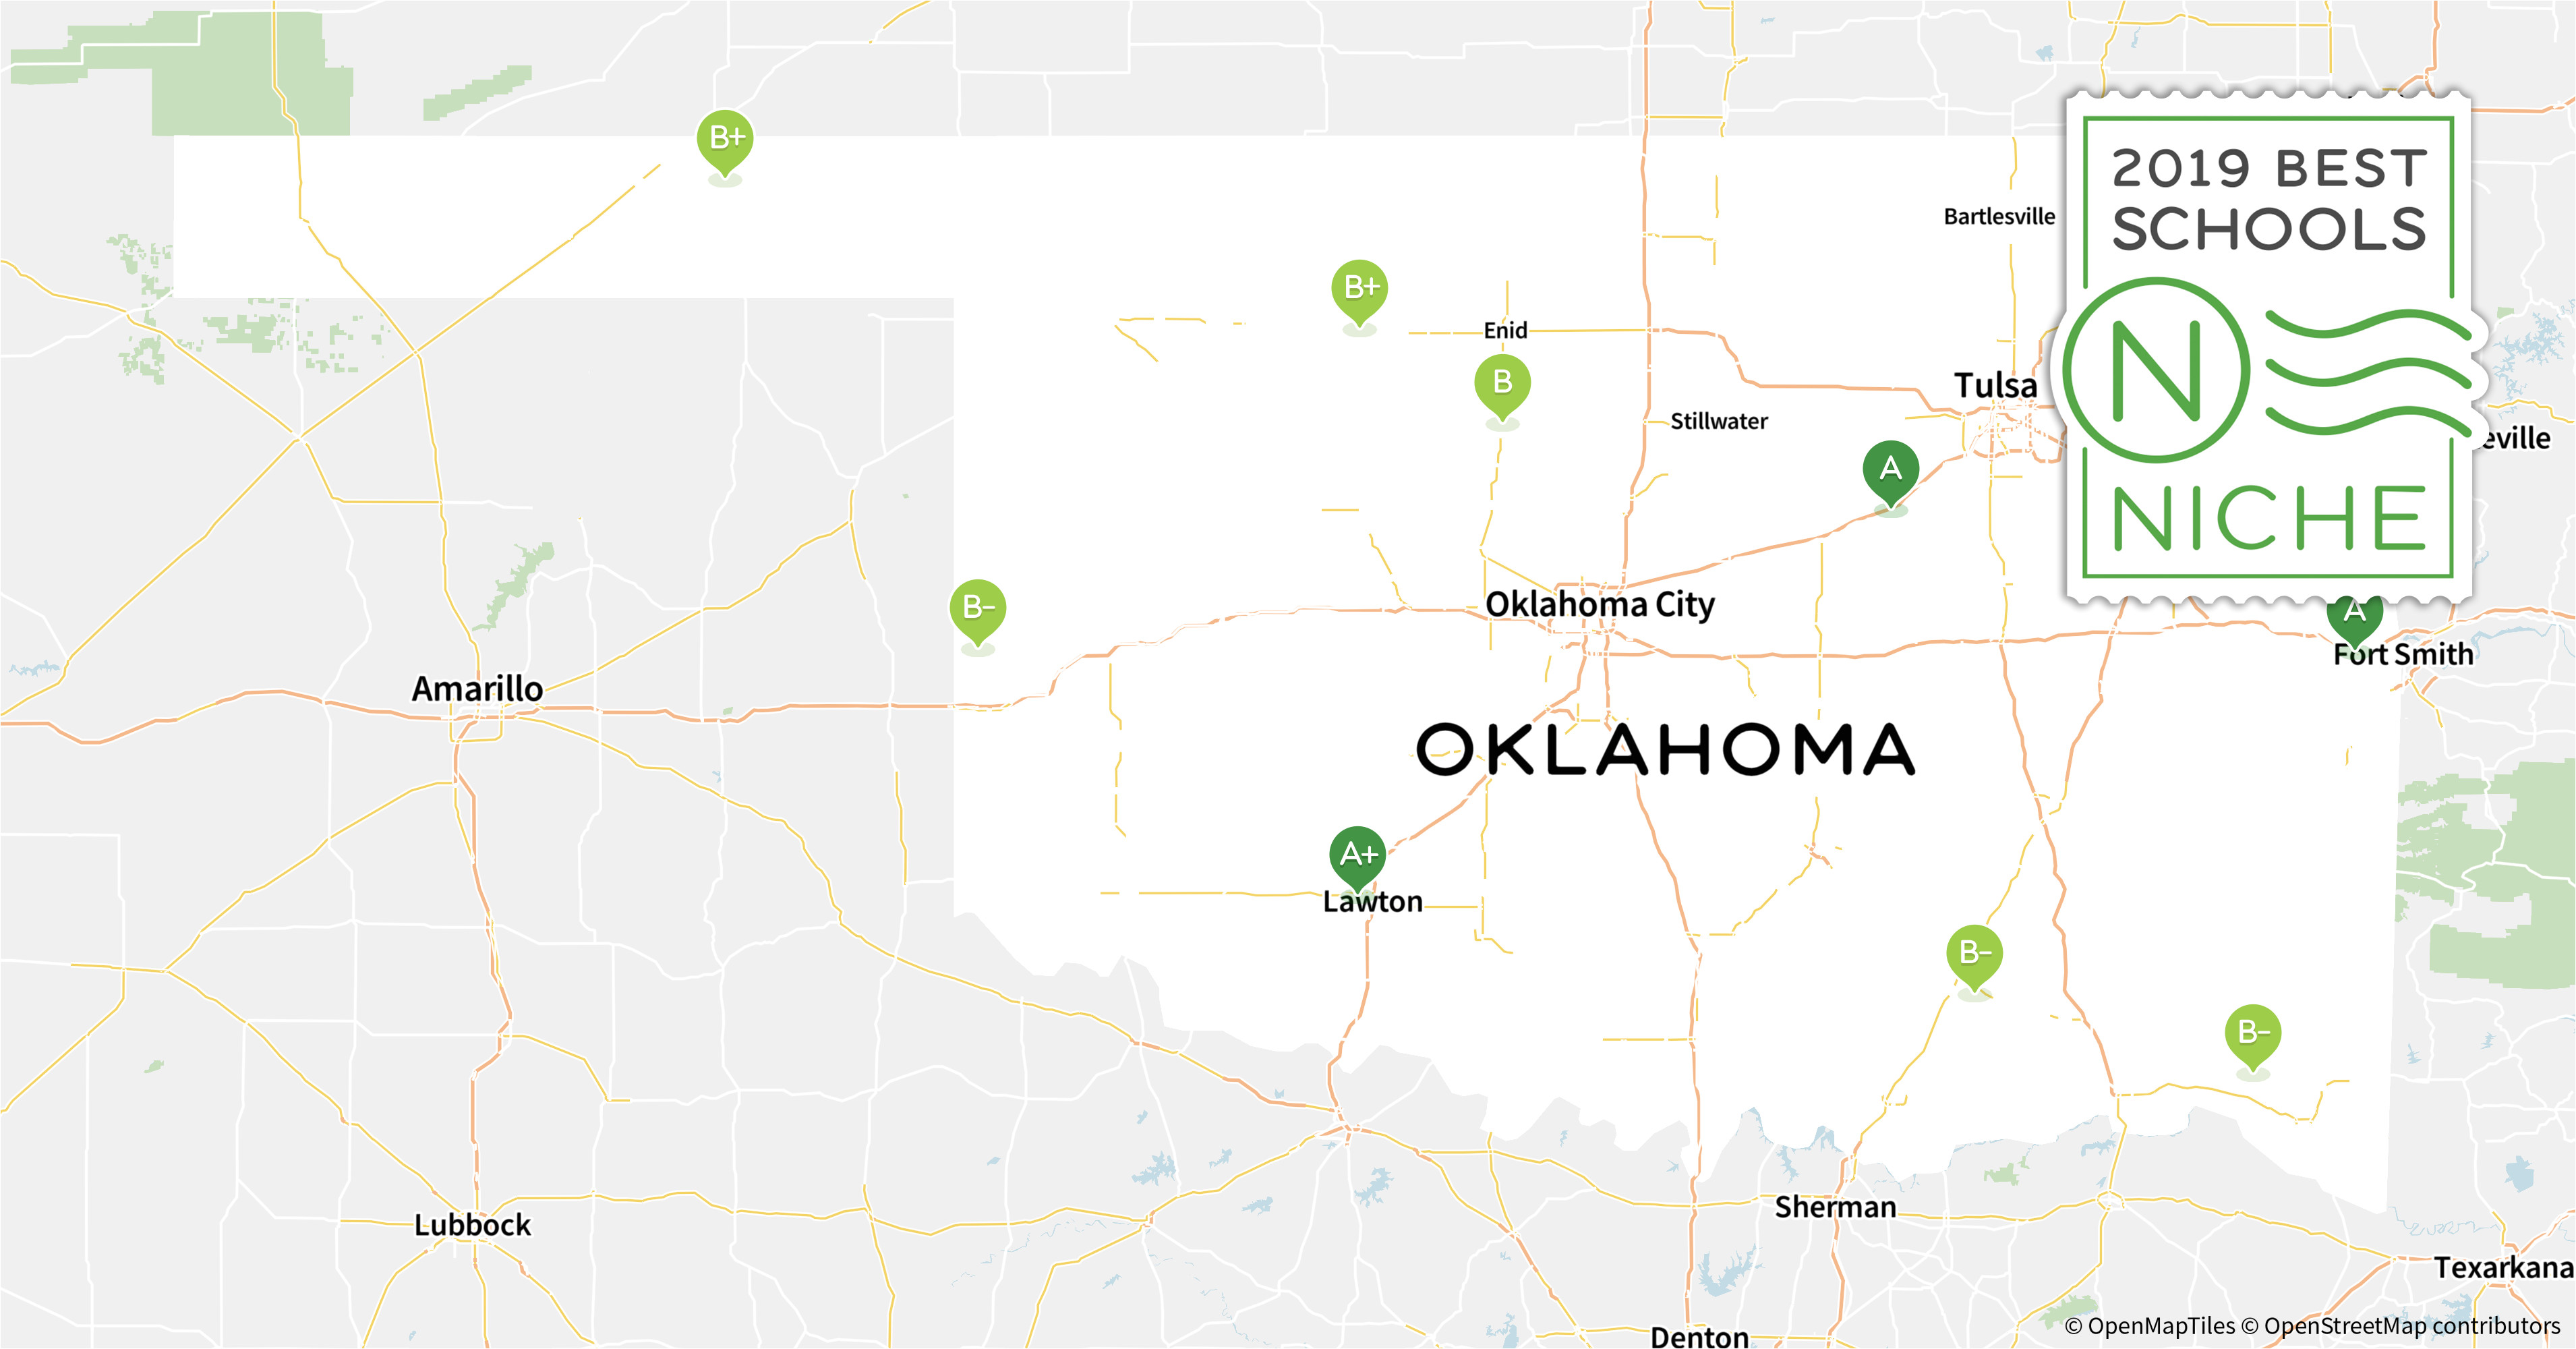 College Of Marin Map 2019 2019 Best School Districts In Oklahoma Niche.